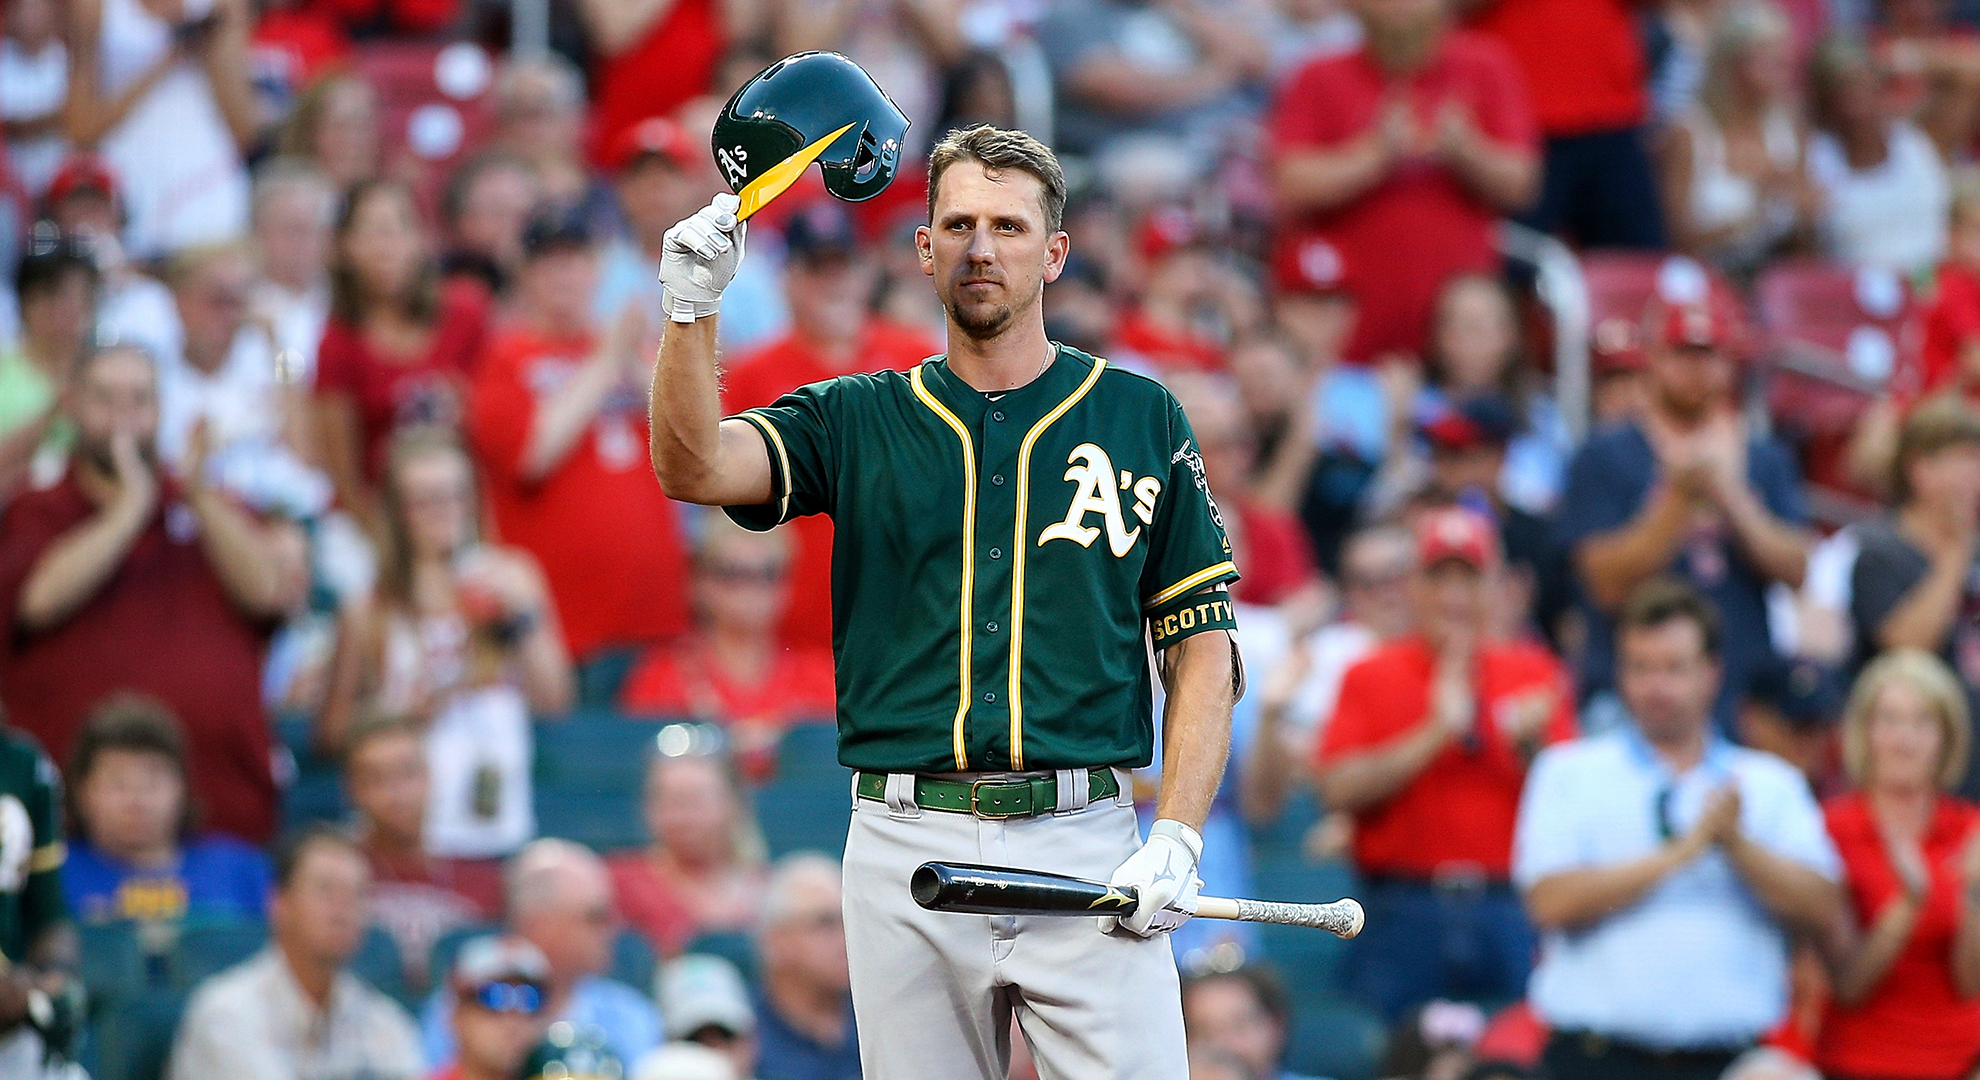 Piscotty felt like his mother was with him during A's return